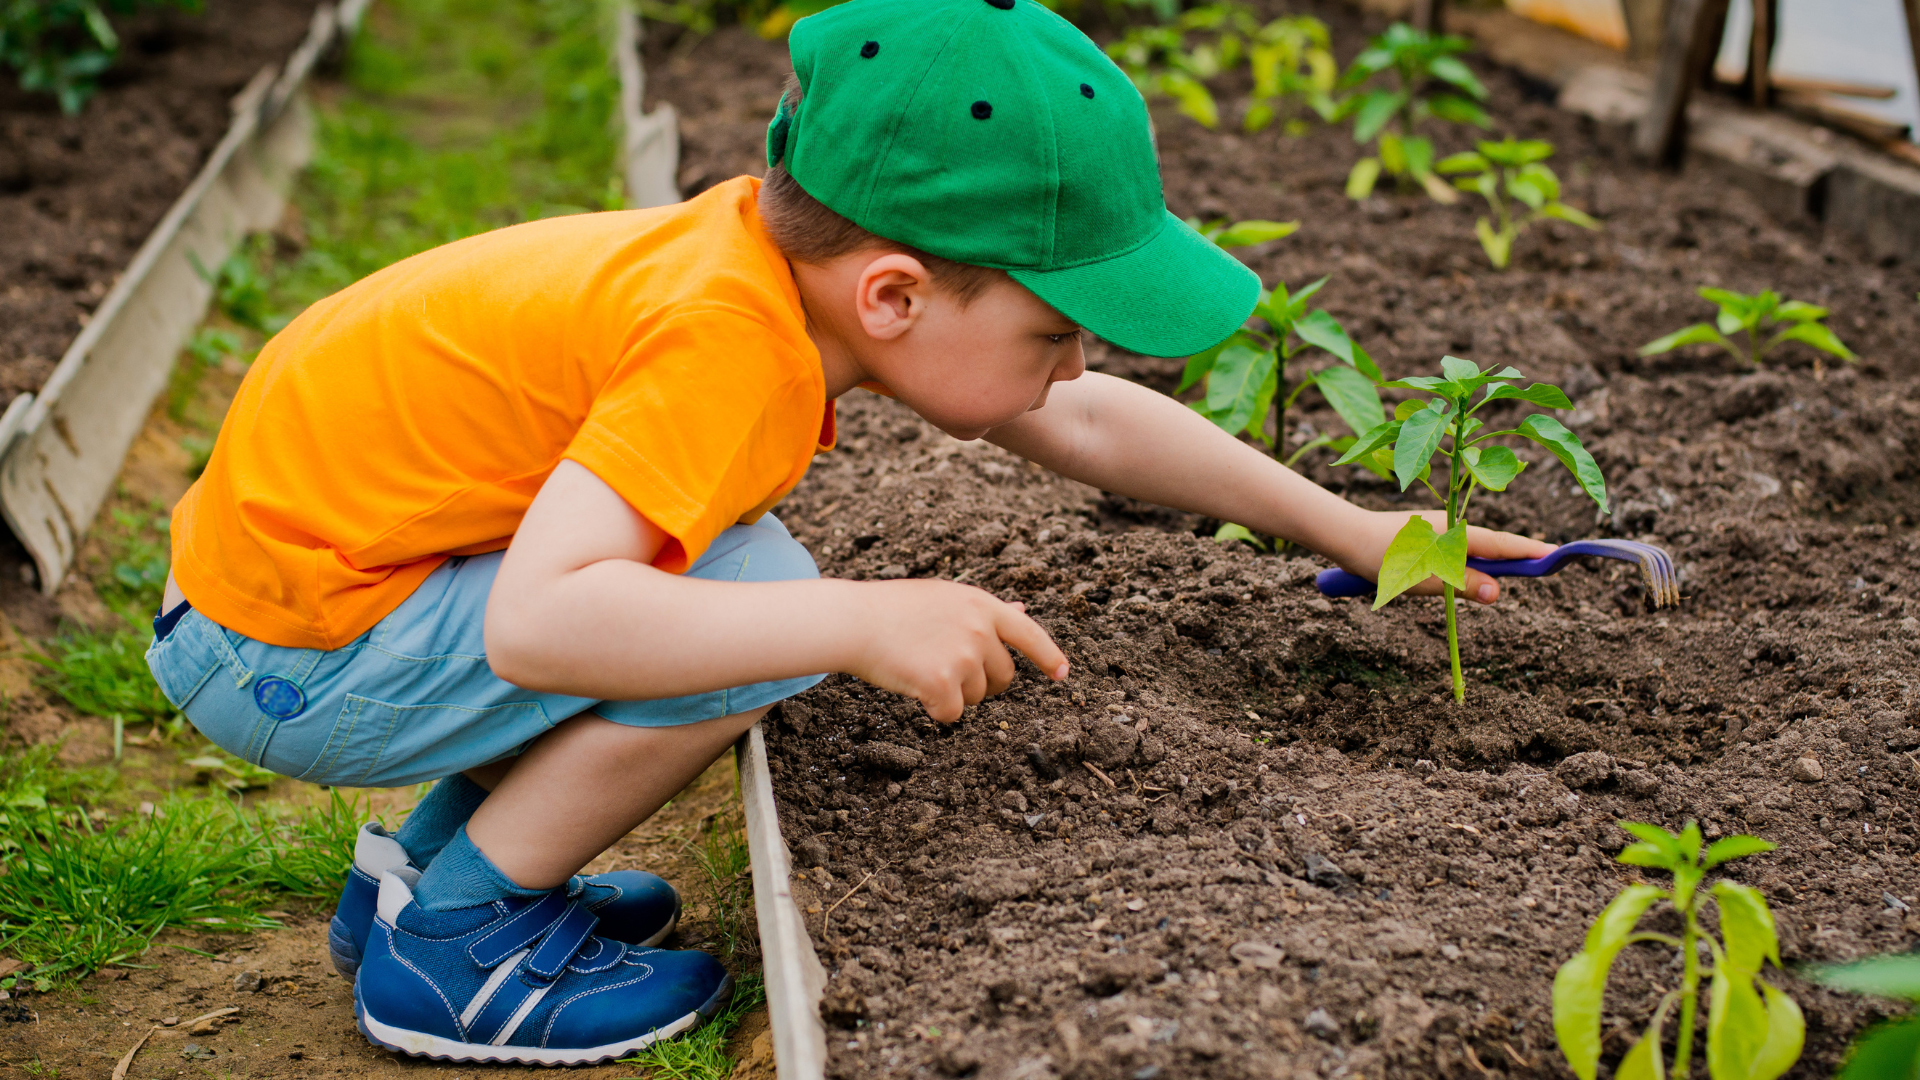 A child digging in an allotment